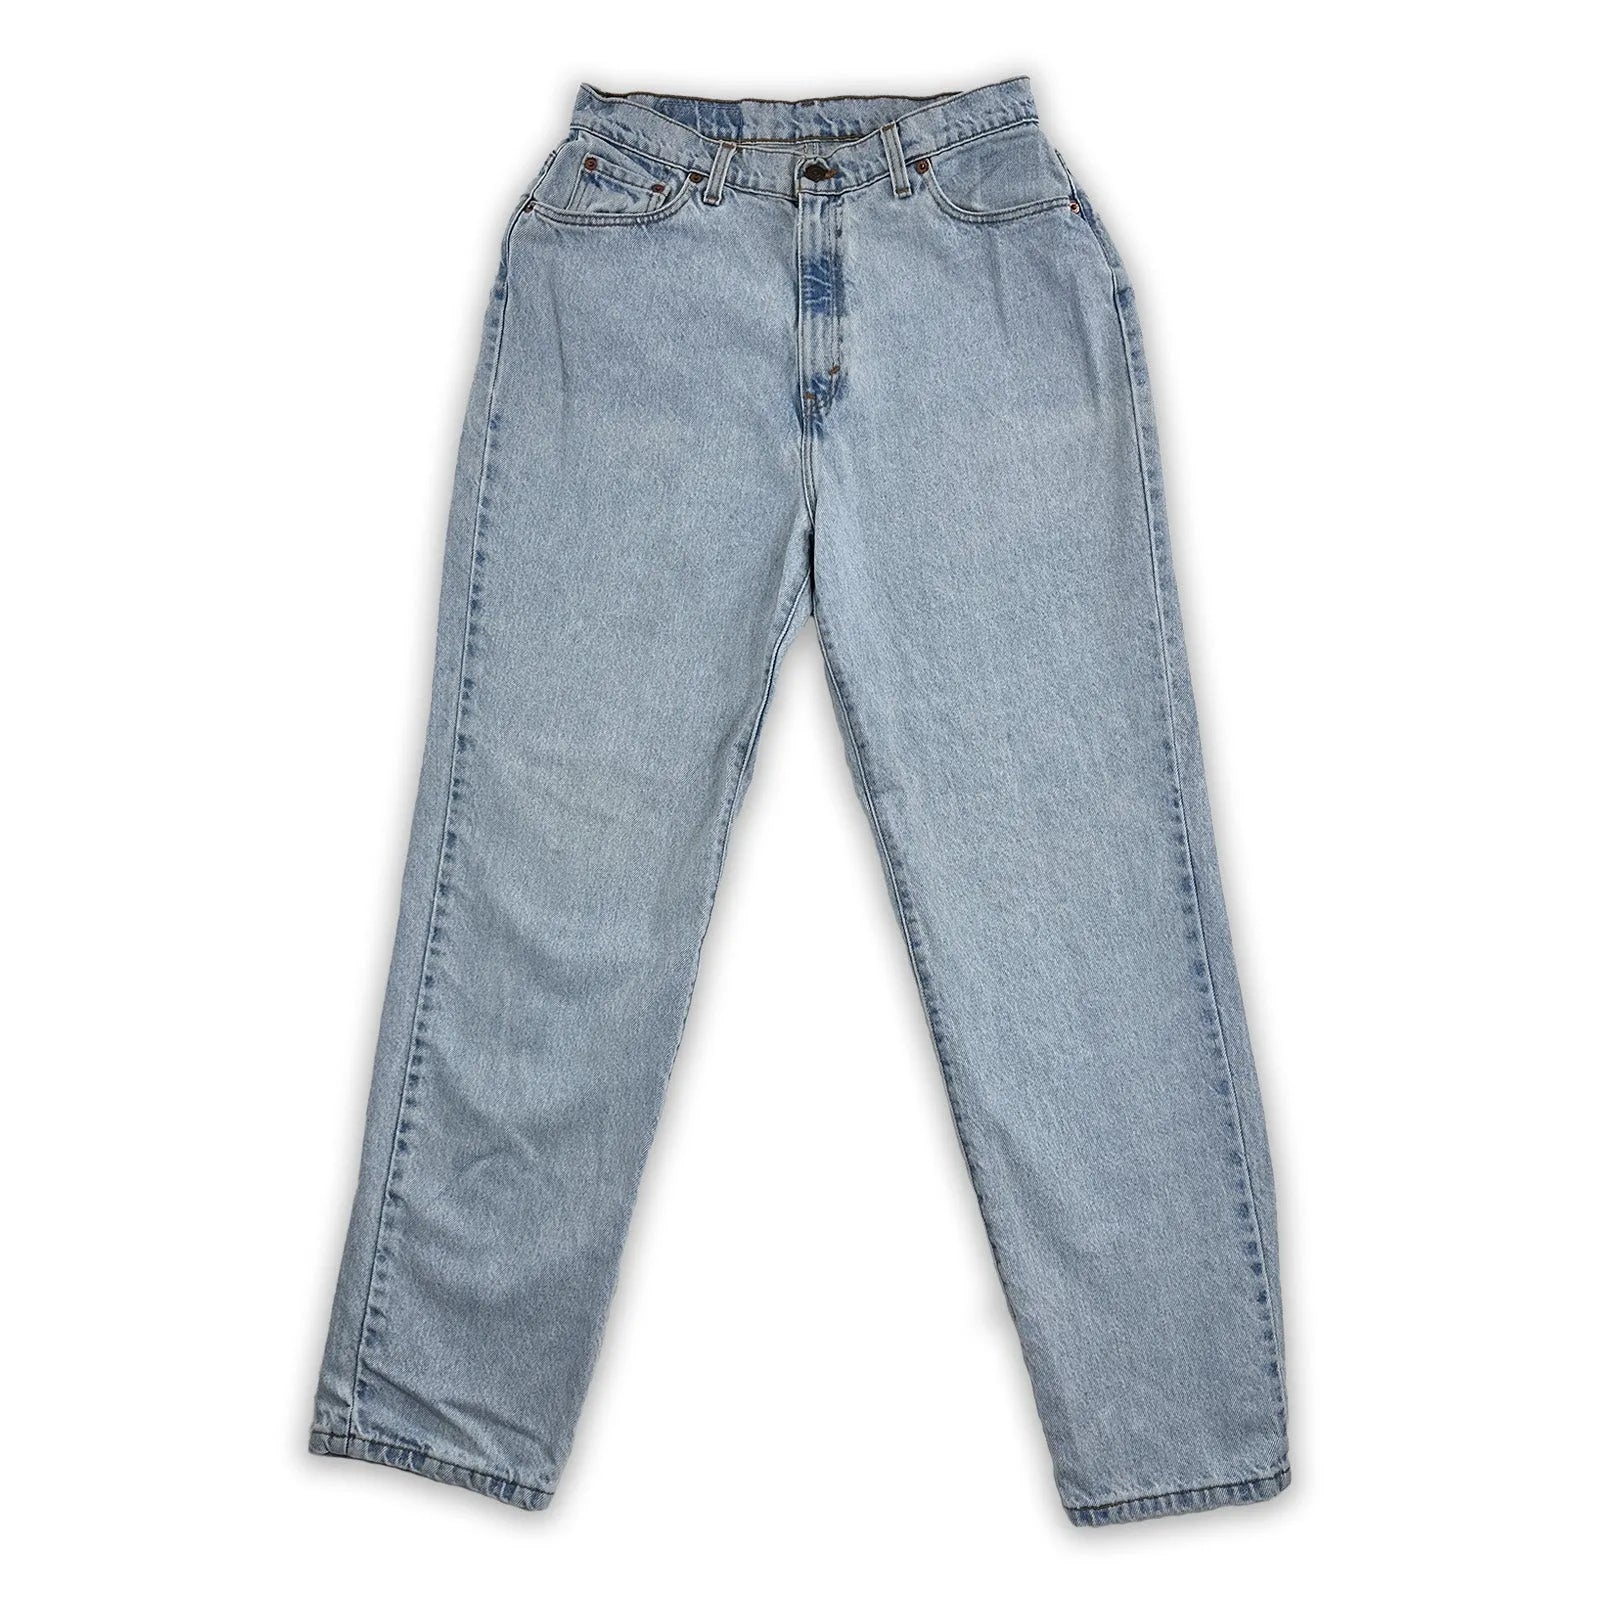 Vintage '90s Levi's Personal Pair Tapered Light Wash - Women's 30x31 Great Lakes Reclaimed Denim